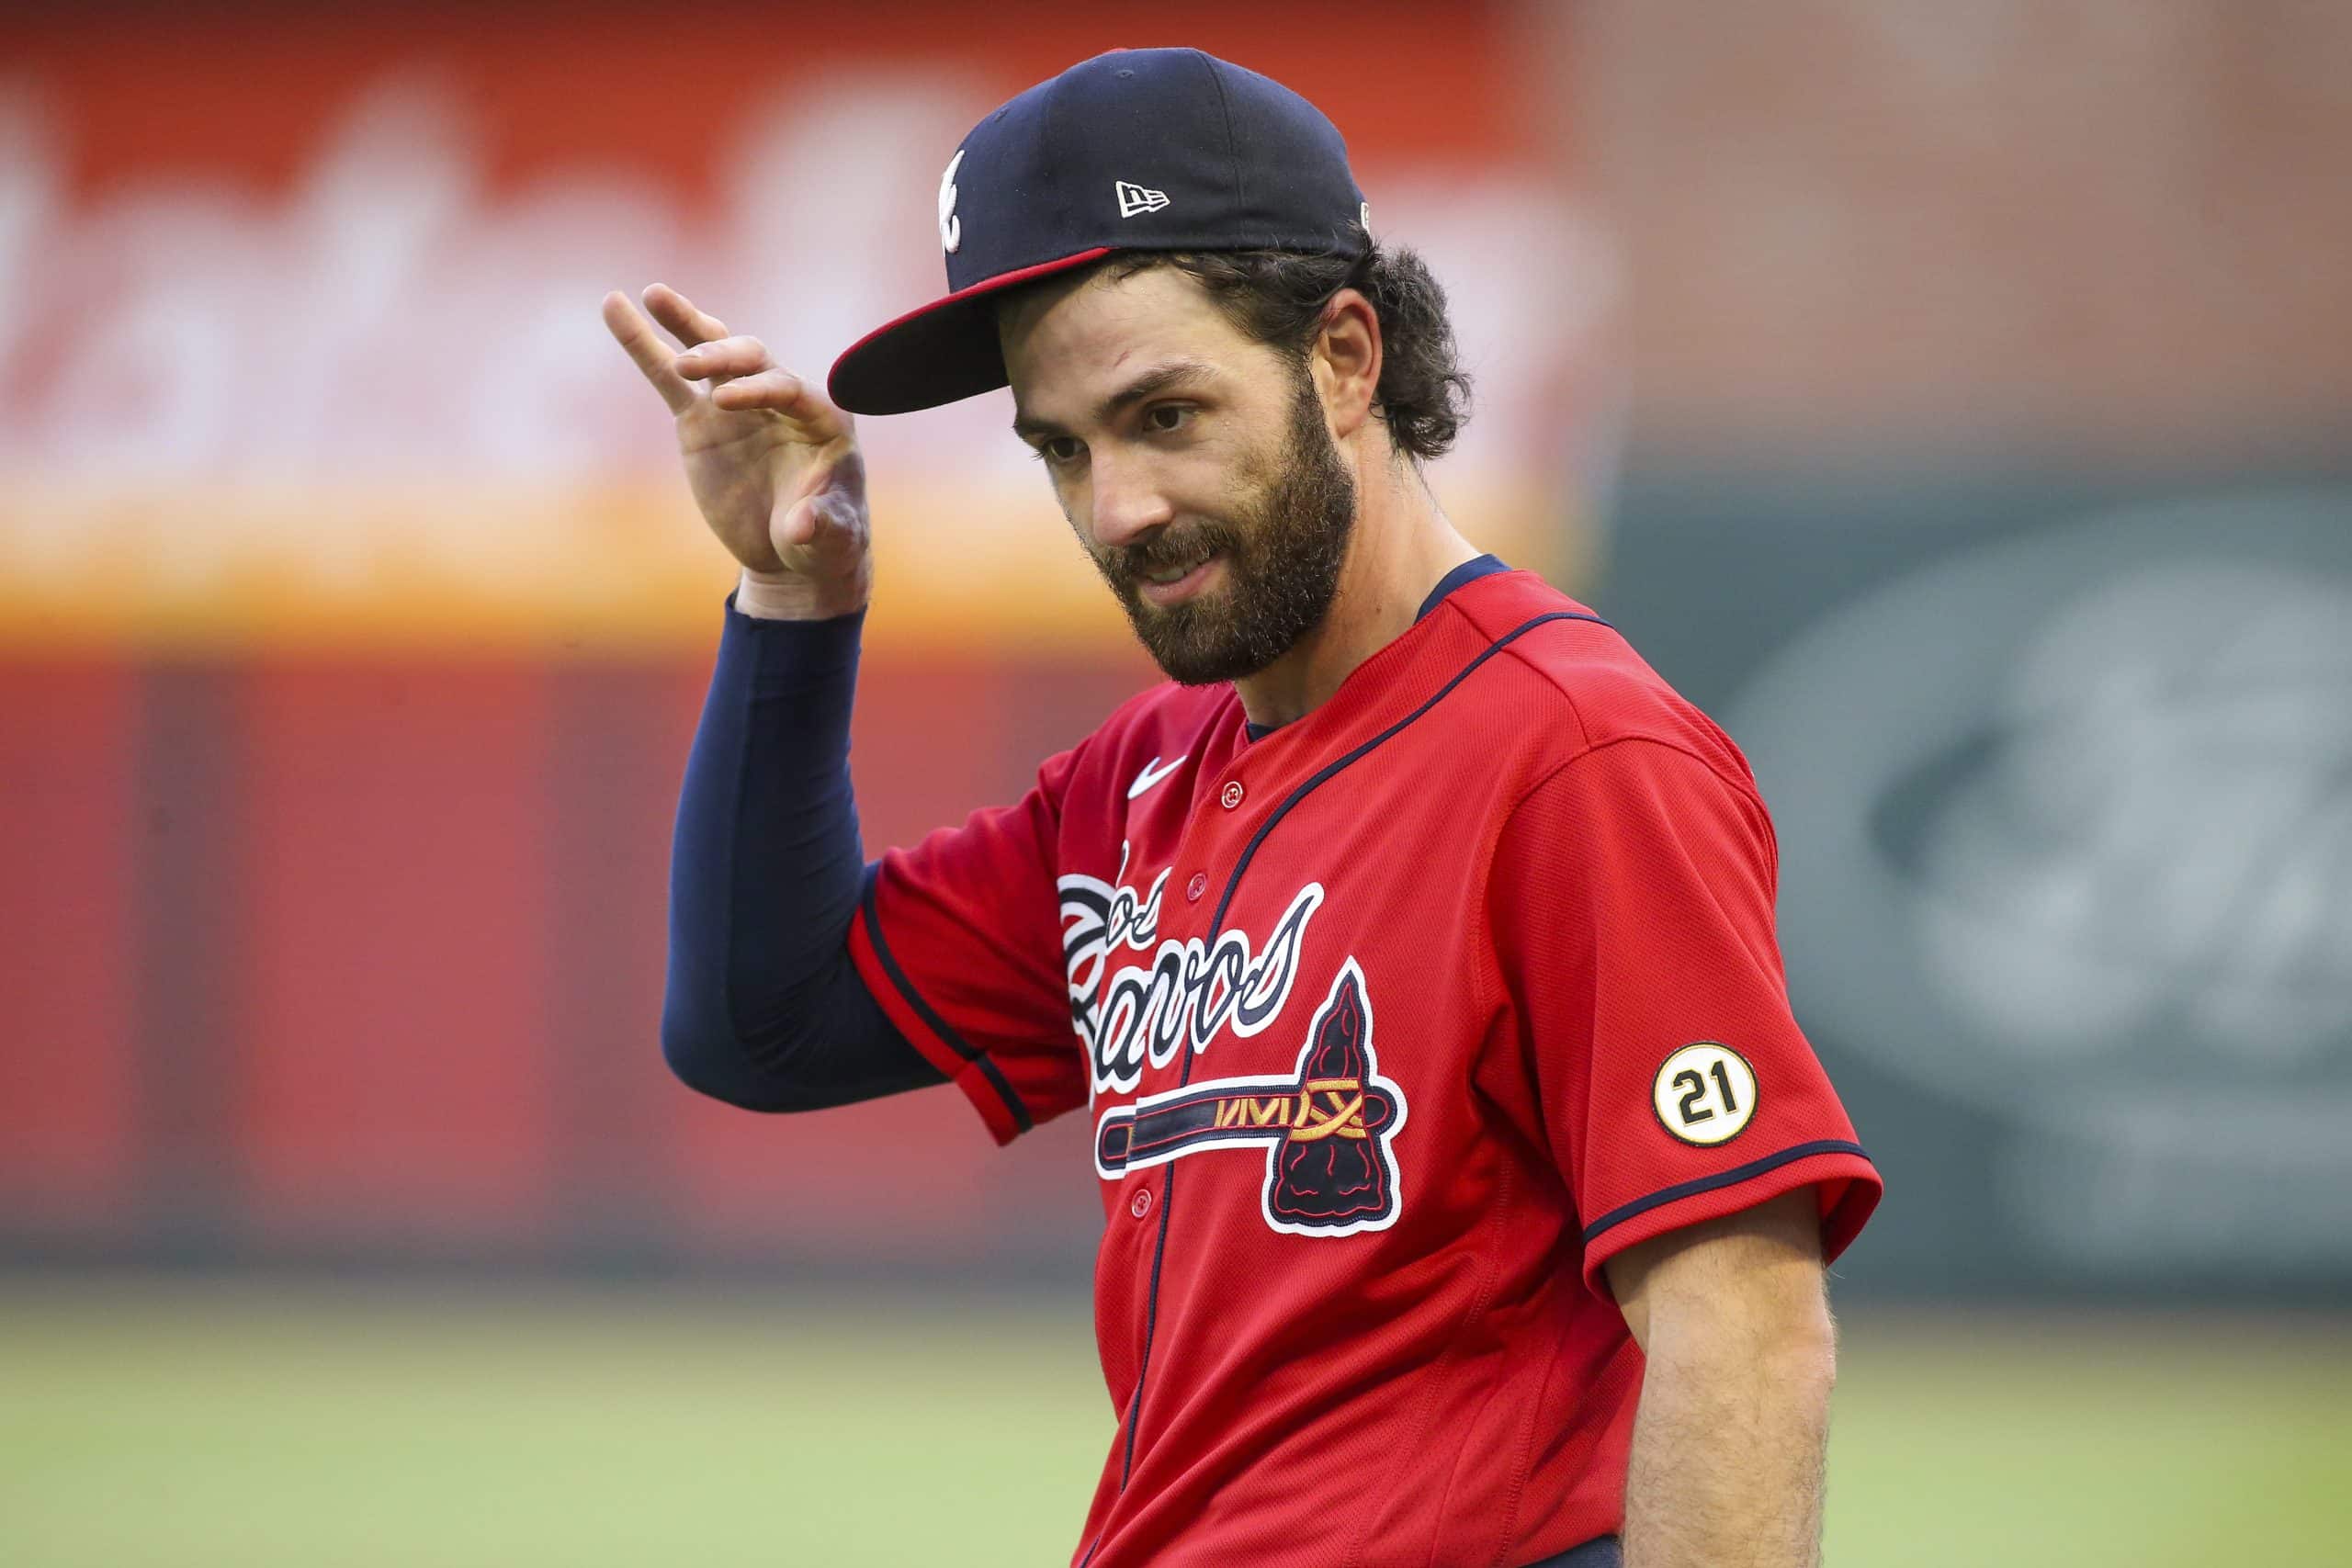 New predictions have Dansby Swanson landing with the Cubs